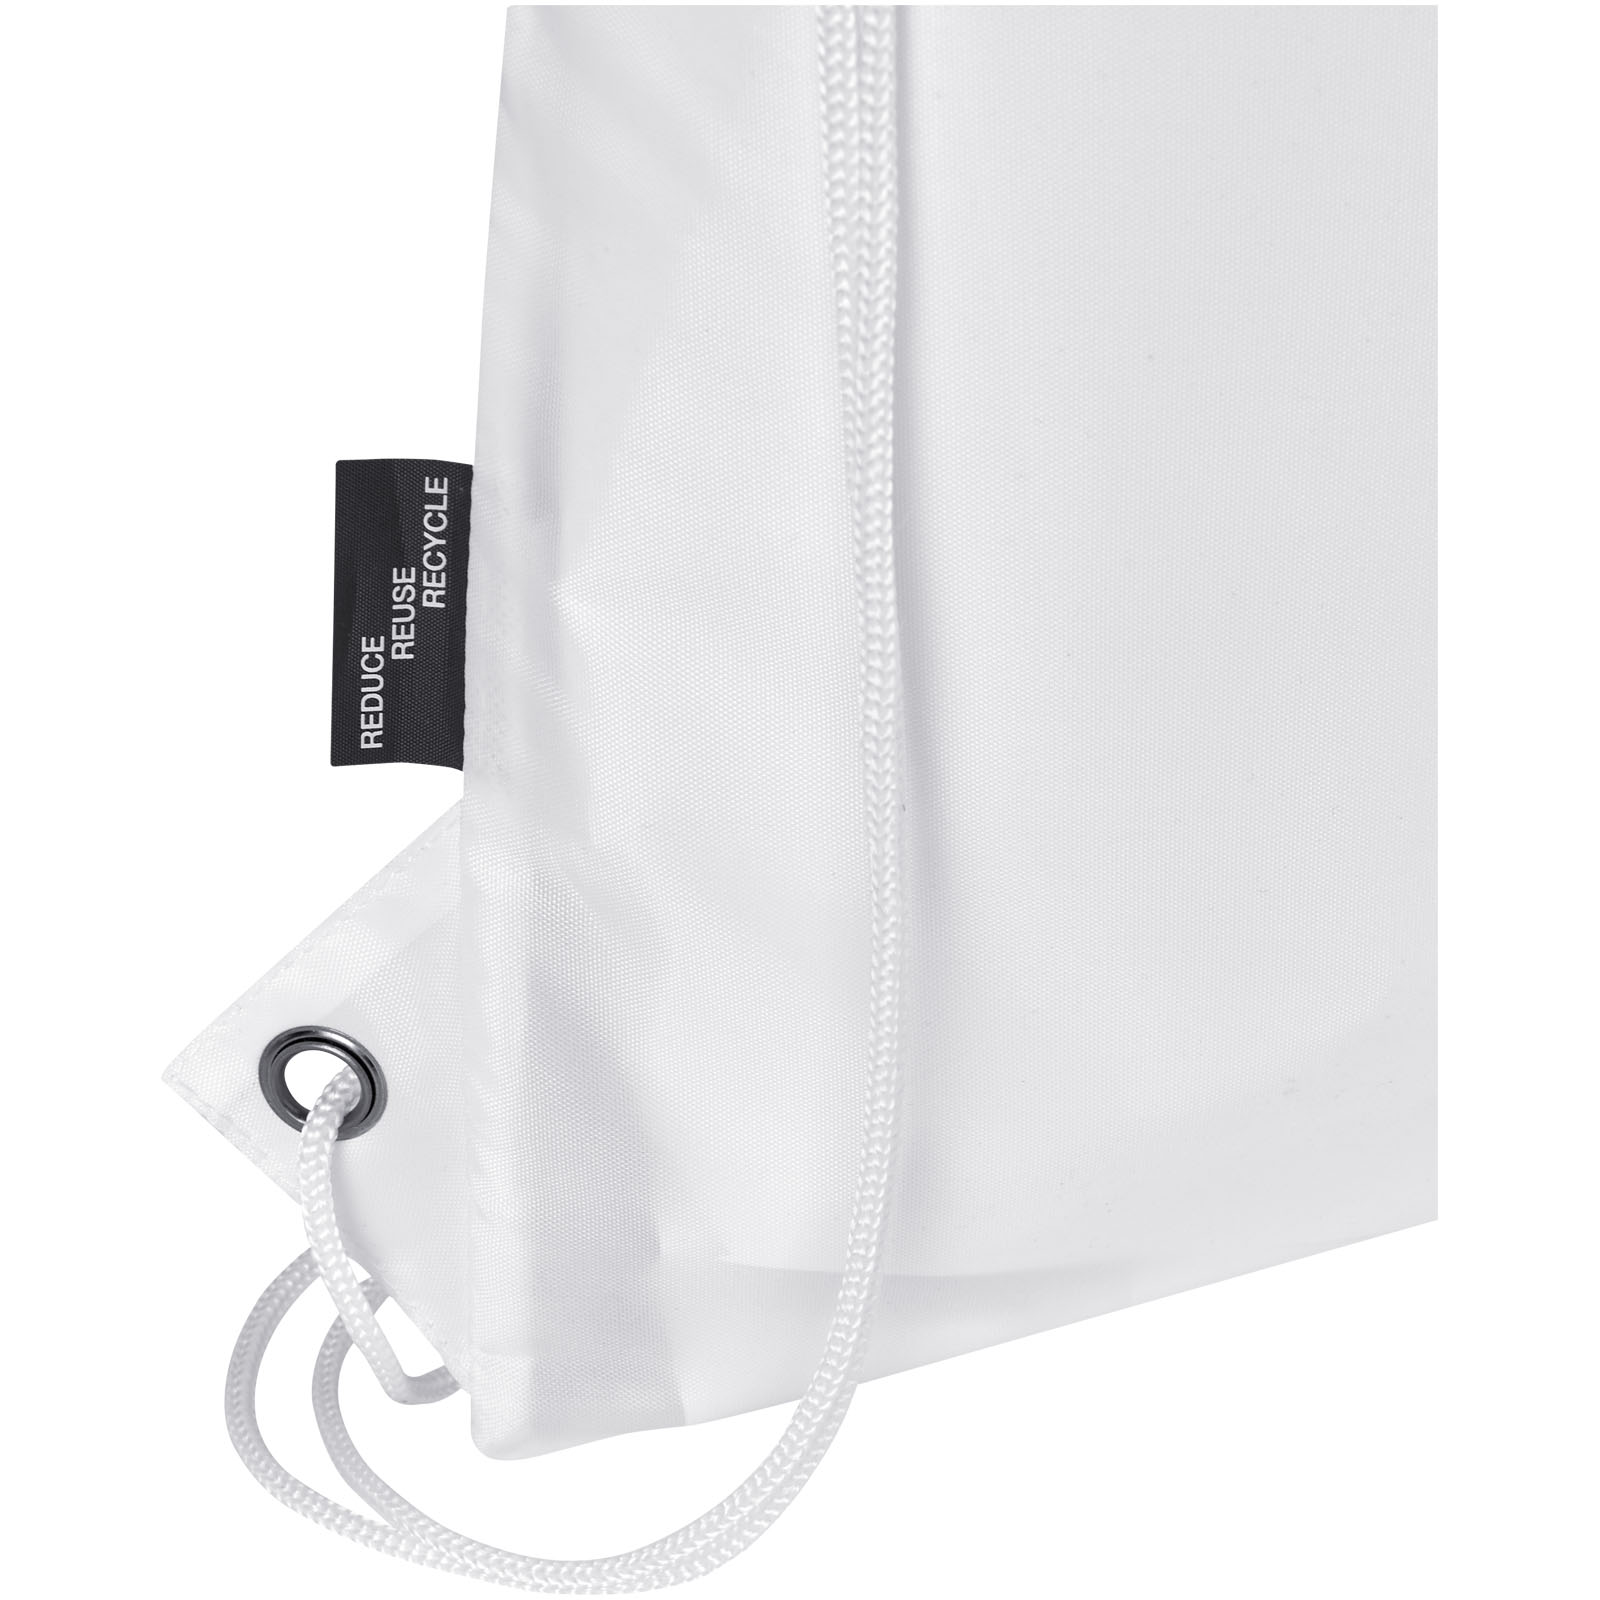 Advertising Drawstring Bags - Adventure recycled insulated drawstring bag 9L - 6